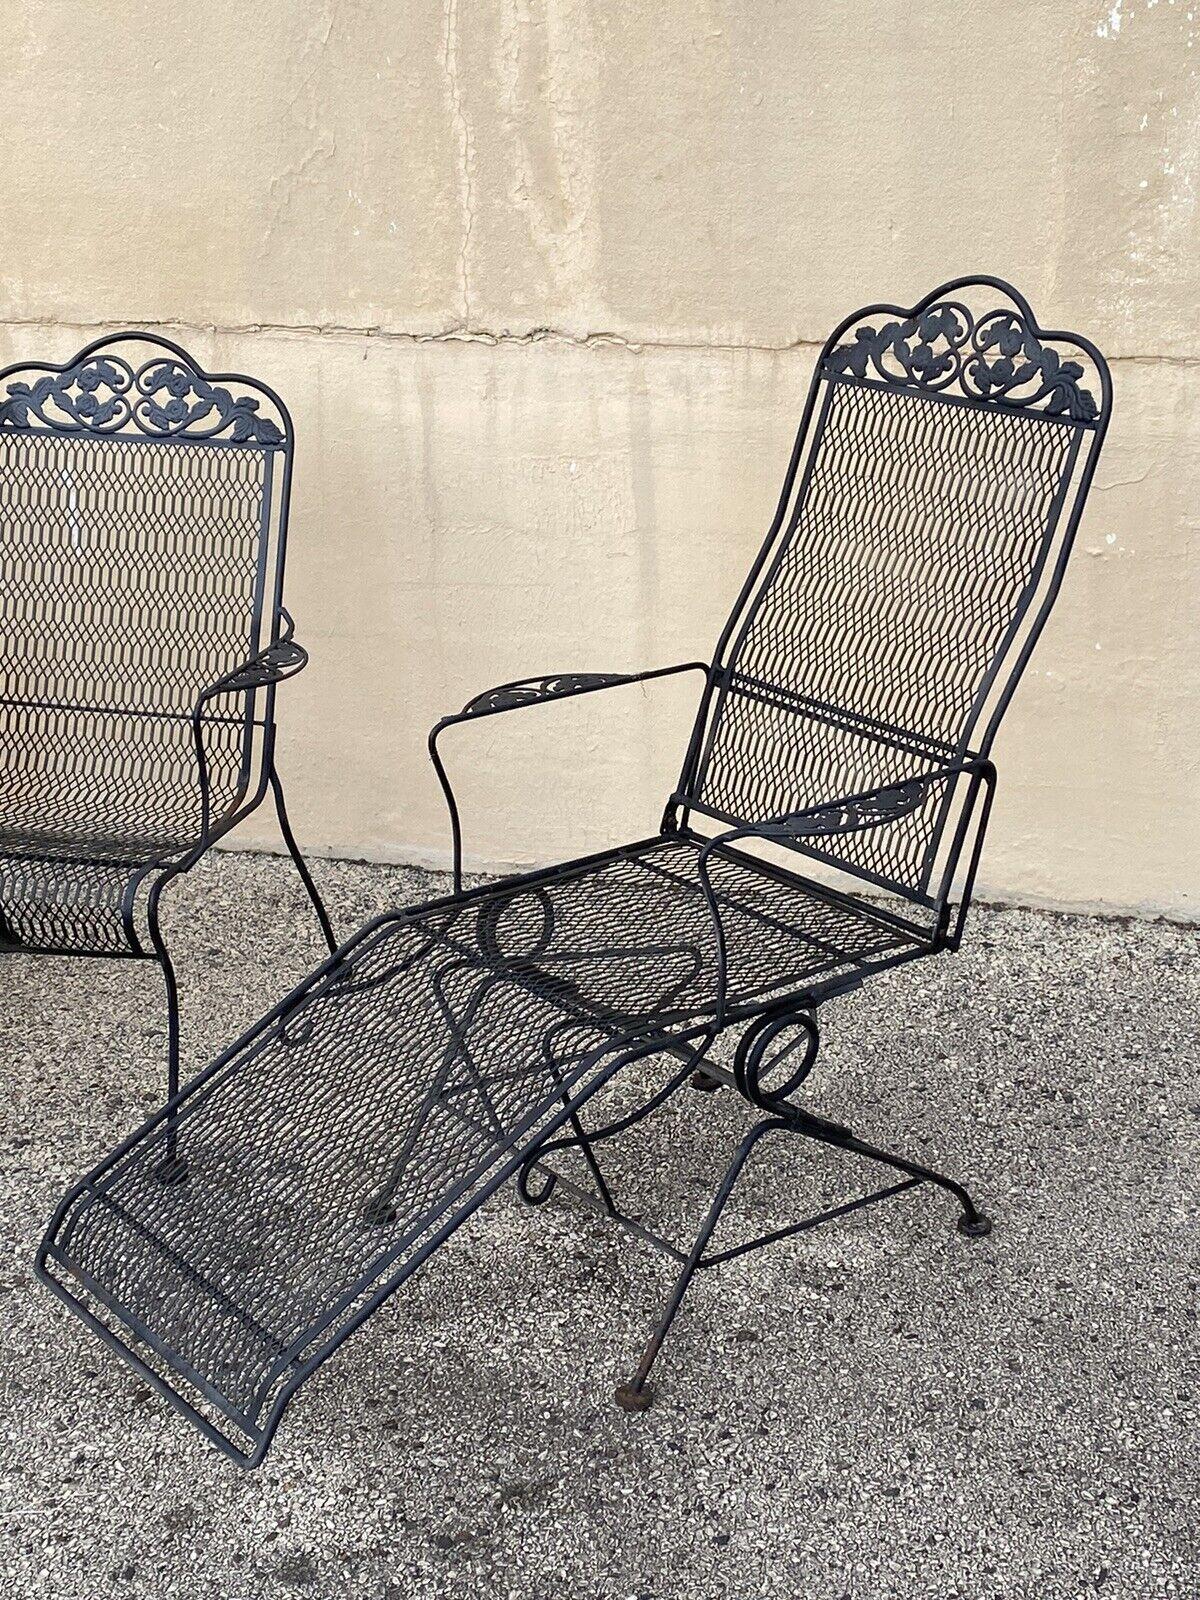 Victorian Vintage Wrought Iron Rose and Vine Pattern Garden Patio Chairs - 7 Pc Set For Sale